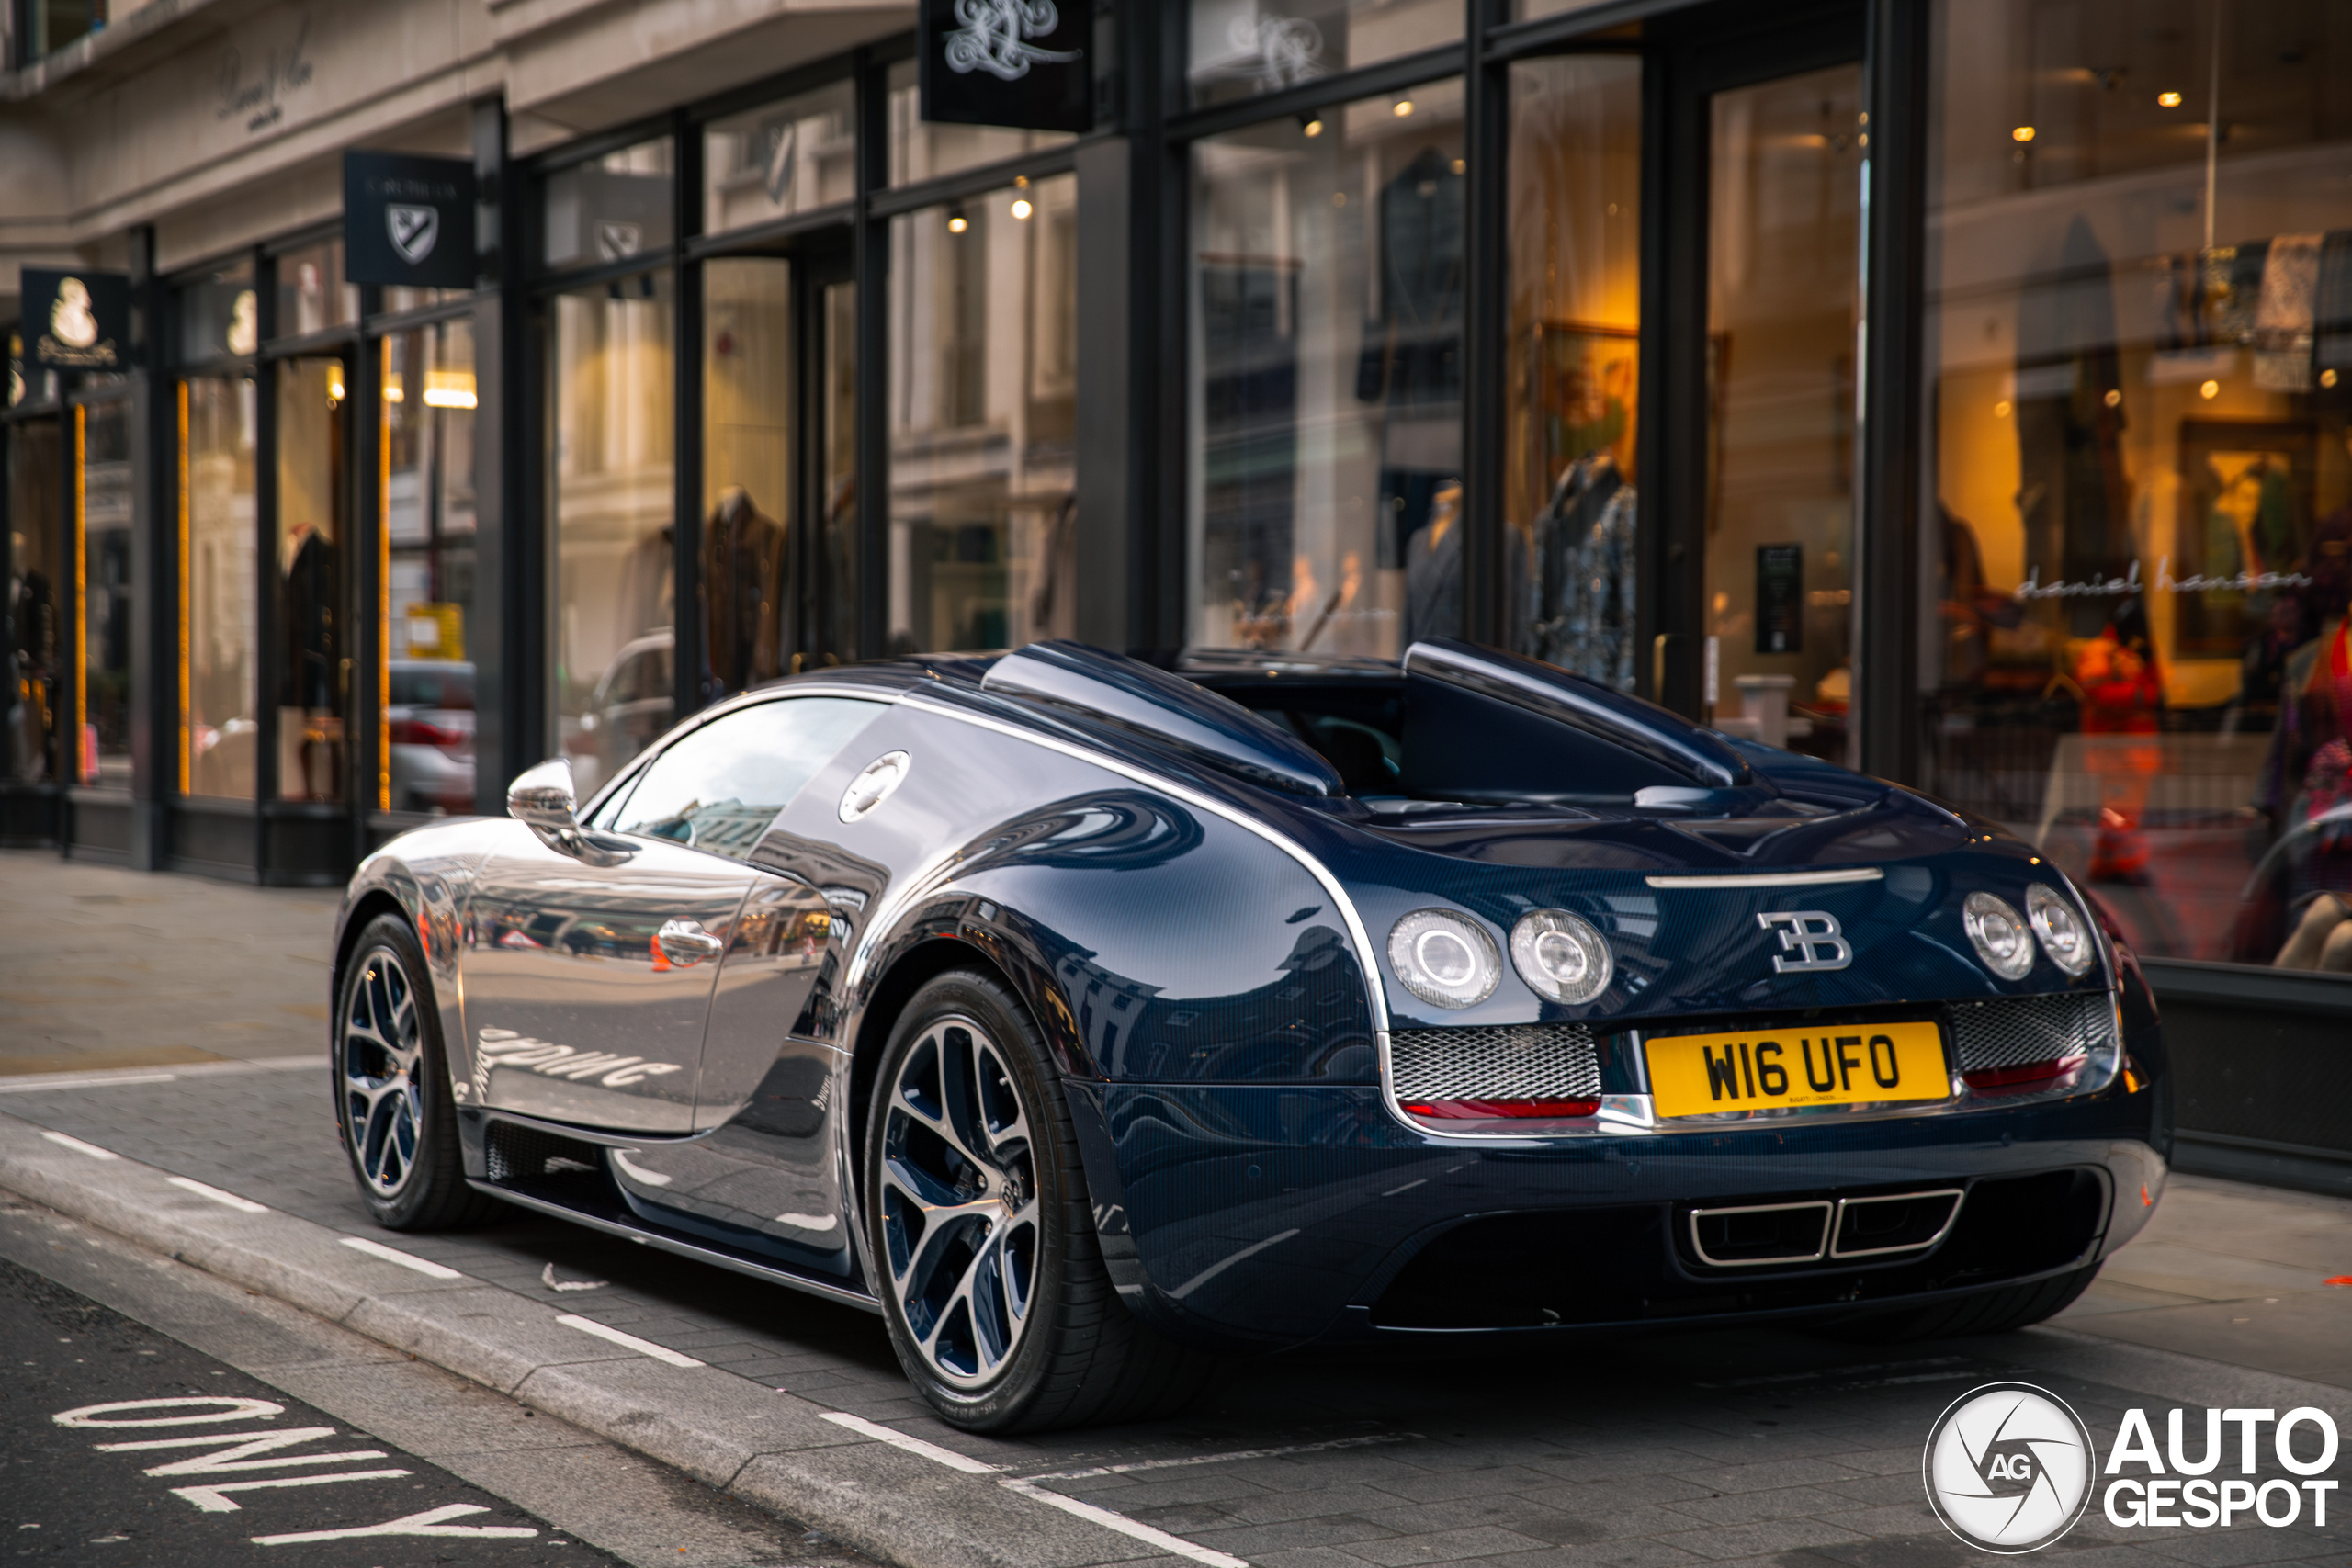 Definitely a Veyron of the more beautiful kind